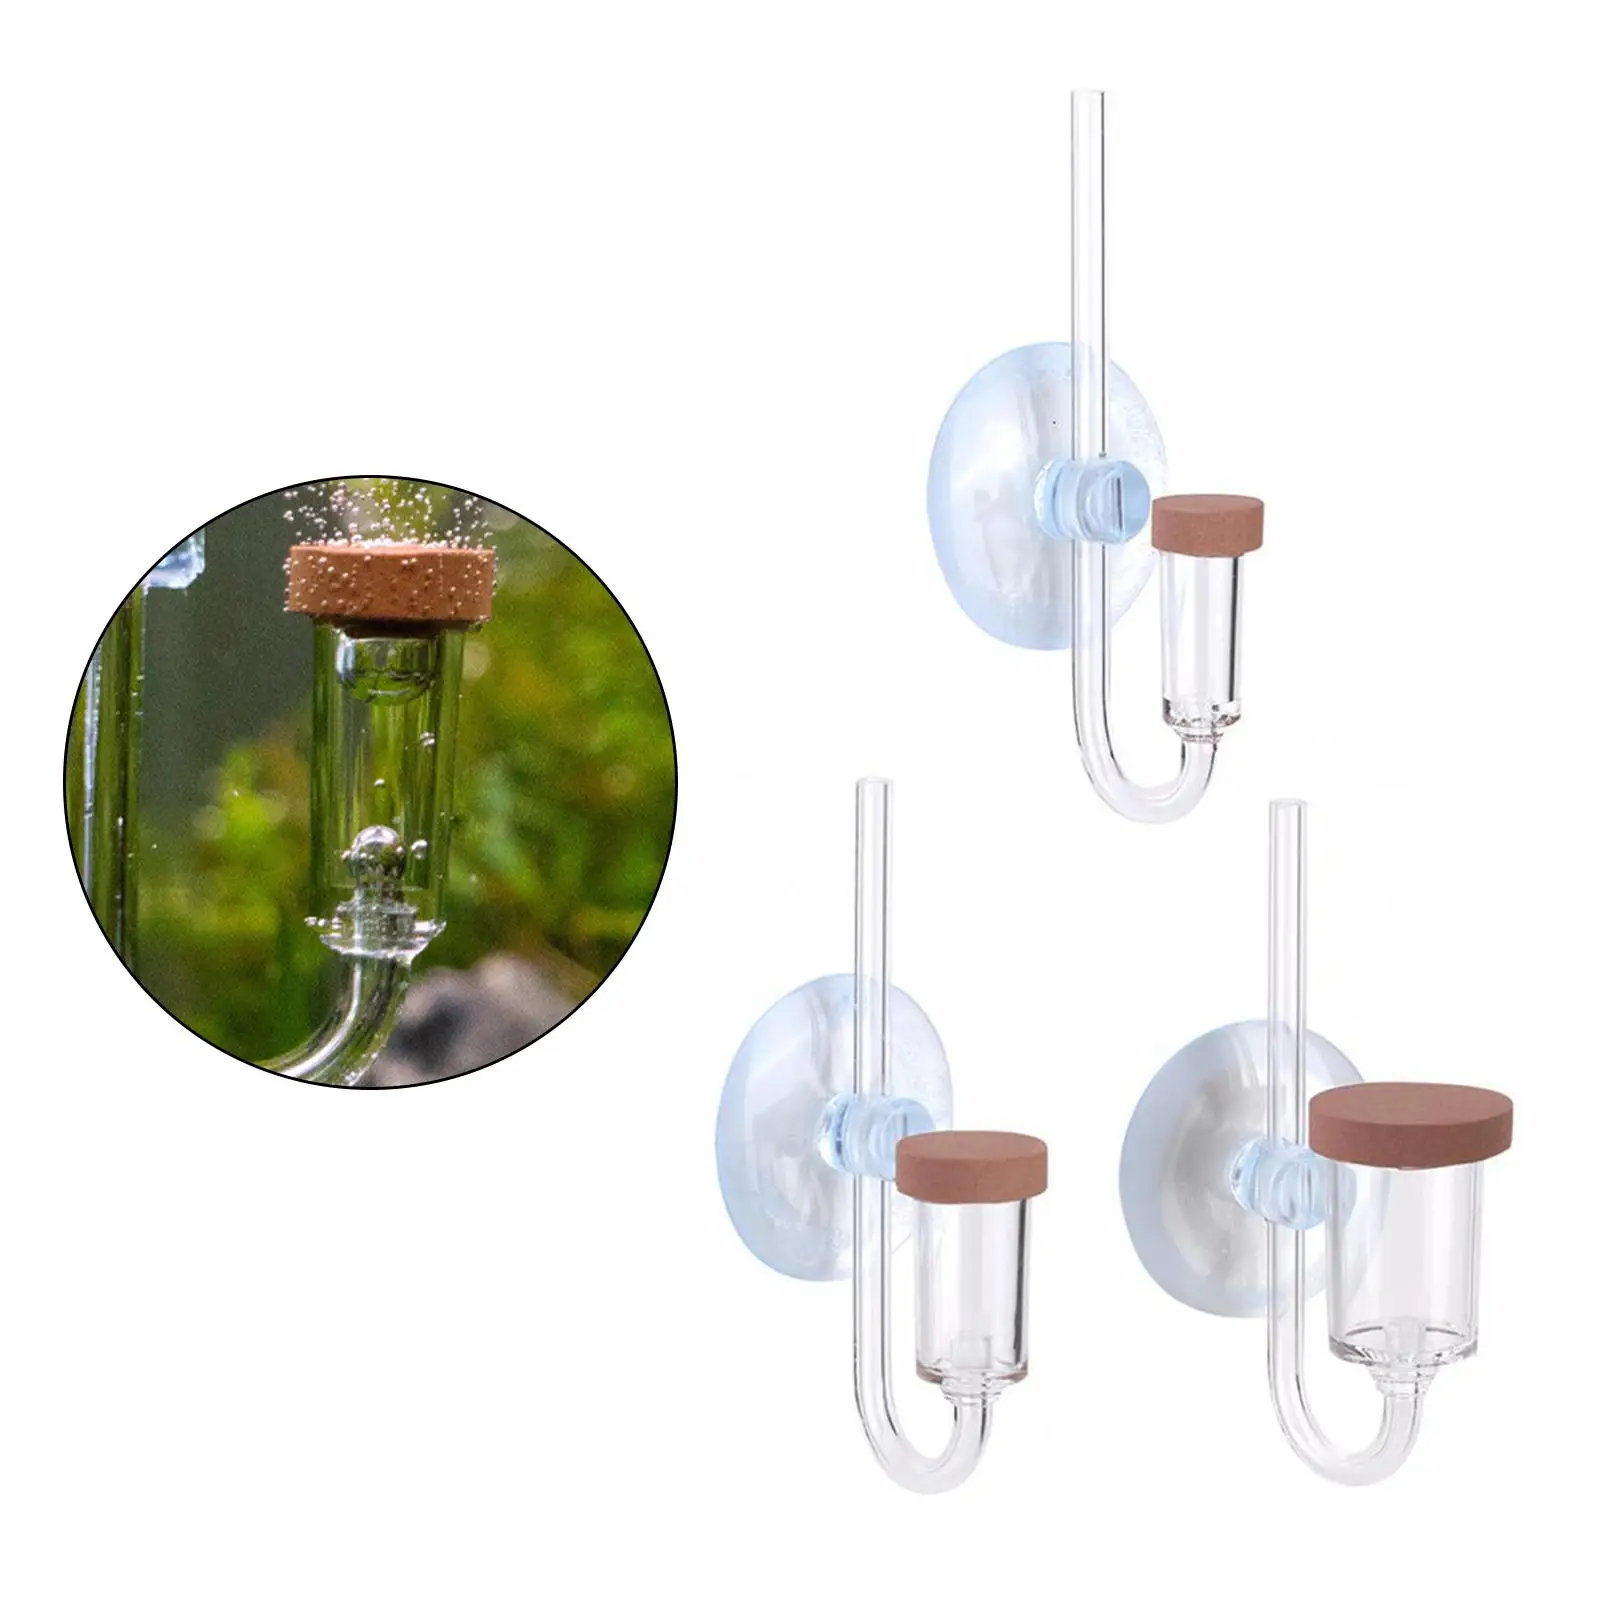 CO2 Diffuser with Suction Cup Mini U Shape Clear CO2 Generator for Aquarium Planted Tank Accessory Equipment Supplies